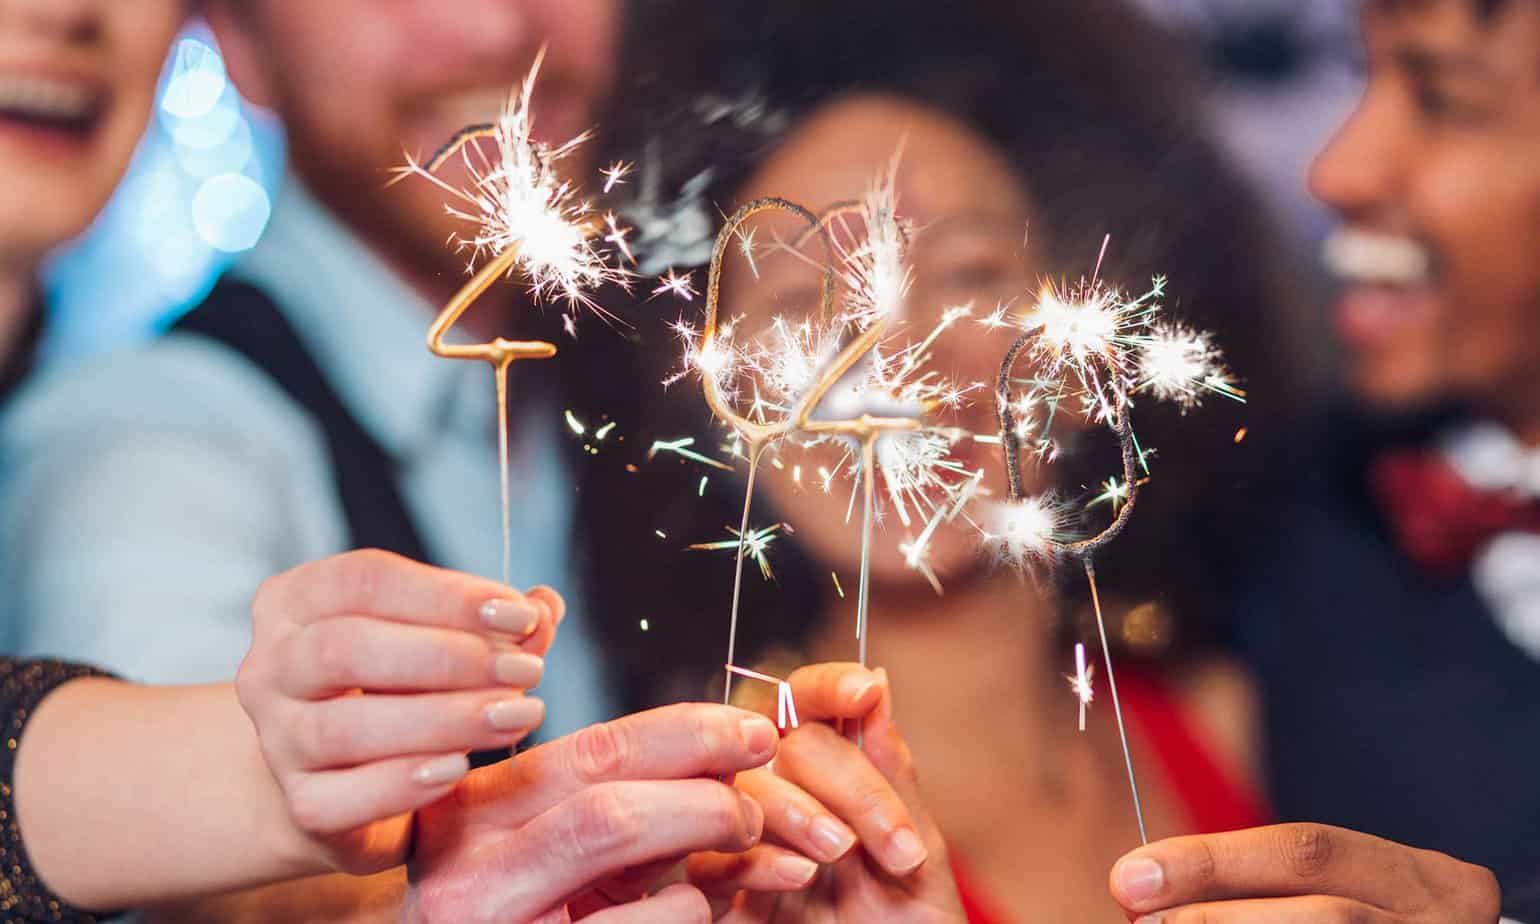 5 Things to Do Instead of Drinking This New Year’s Eve